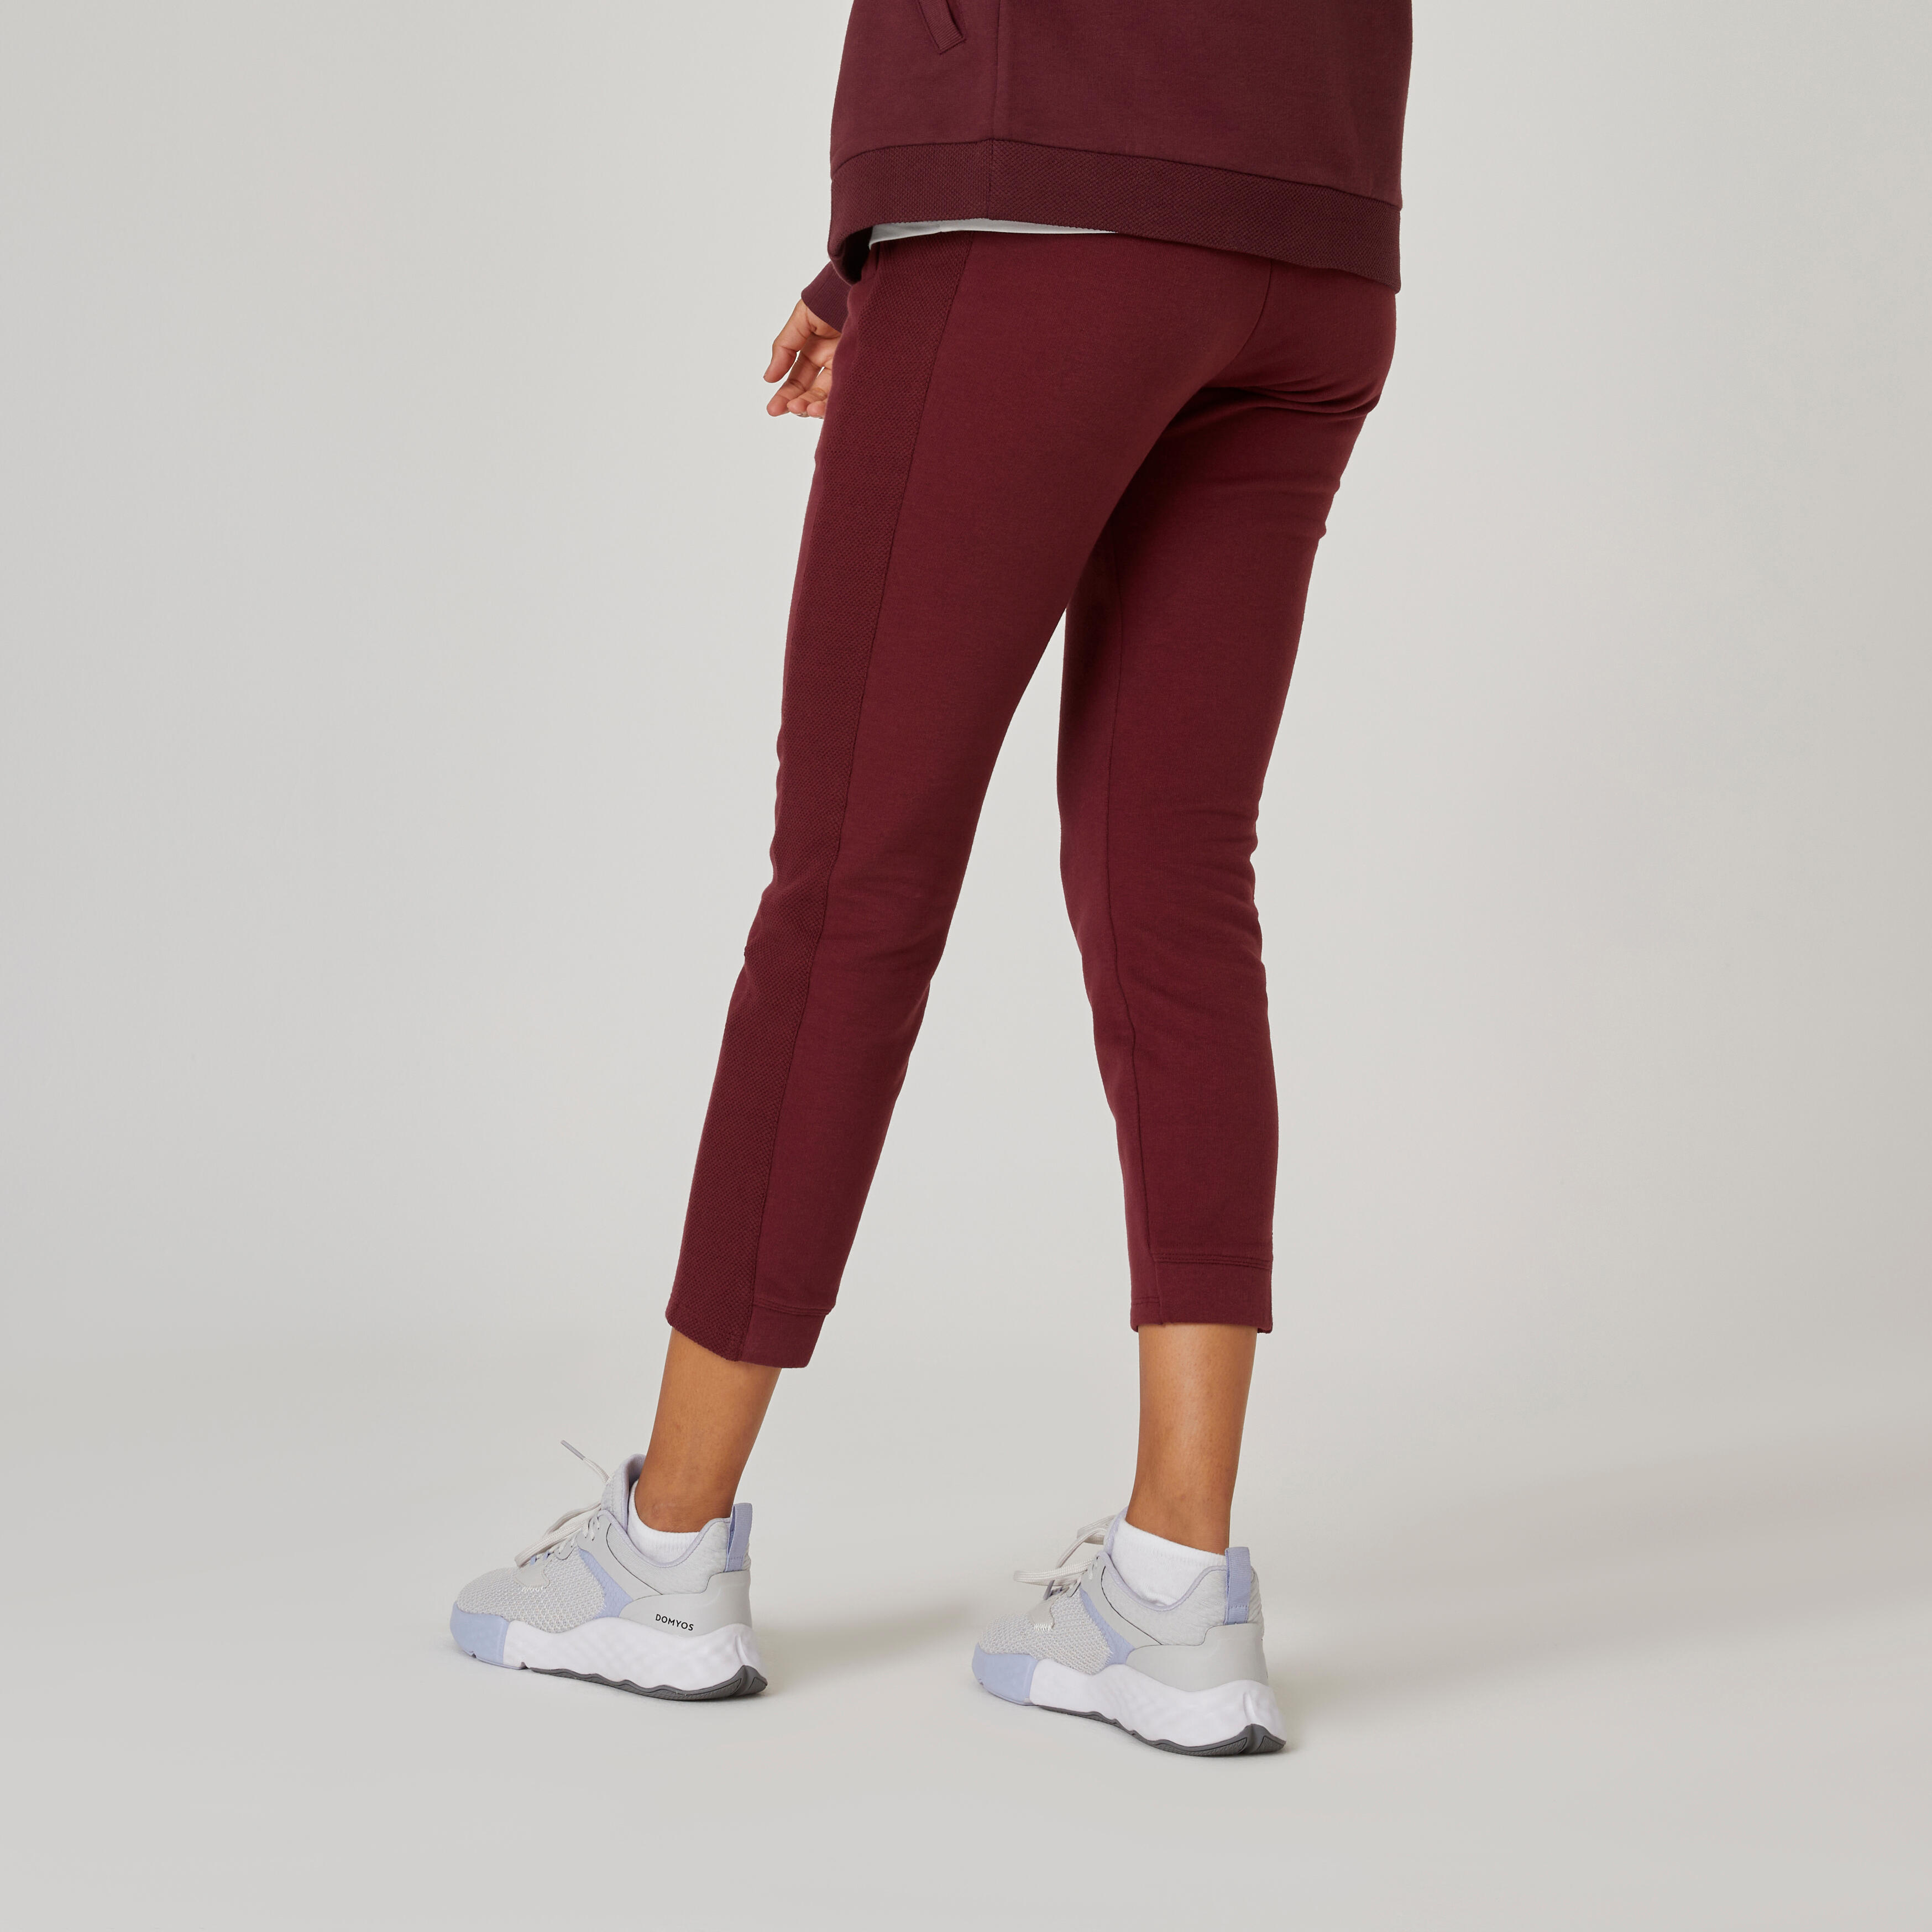 Decathlon Running Leggings Review | International Society of Precision  Agriculture